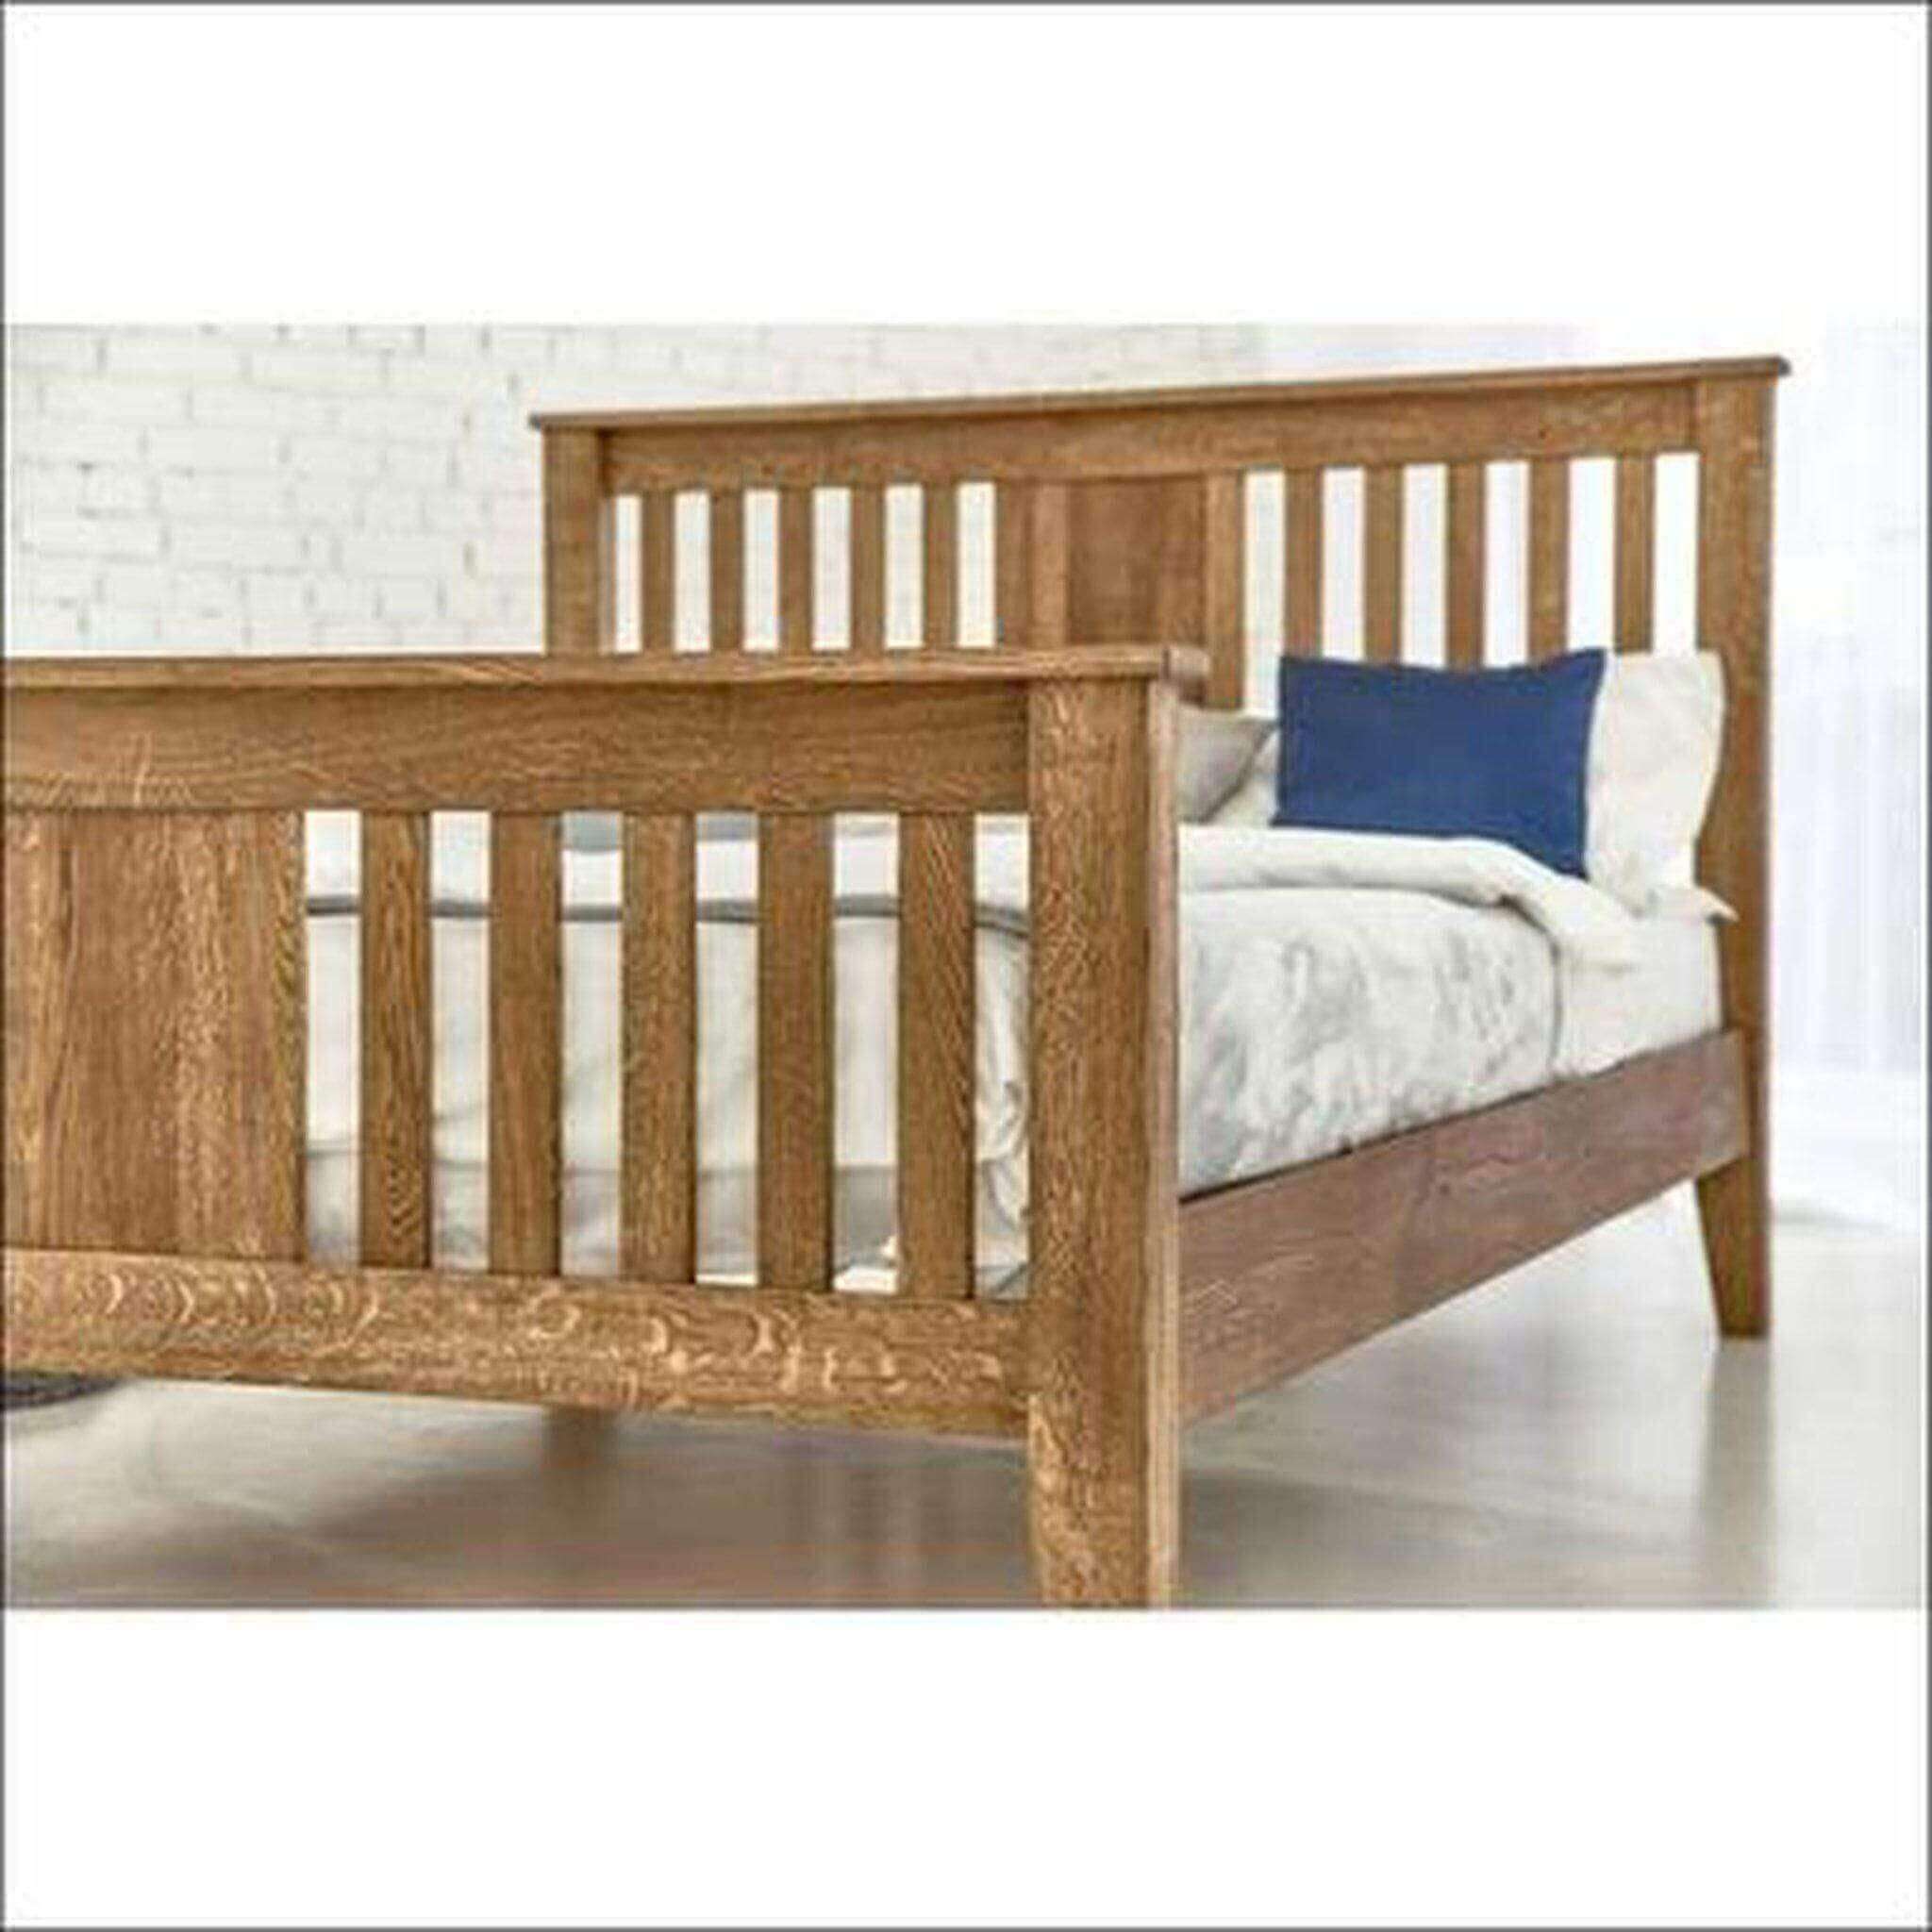 King Size Teak Wood Bed Frame With Slatted Head Board - TimberCraft